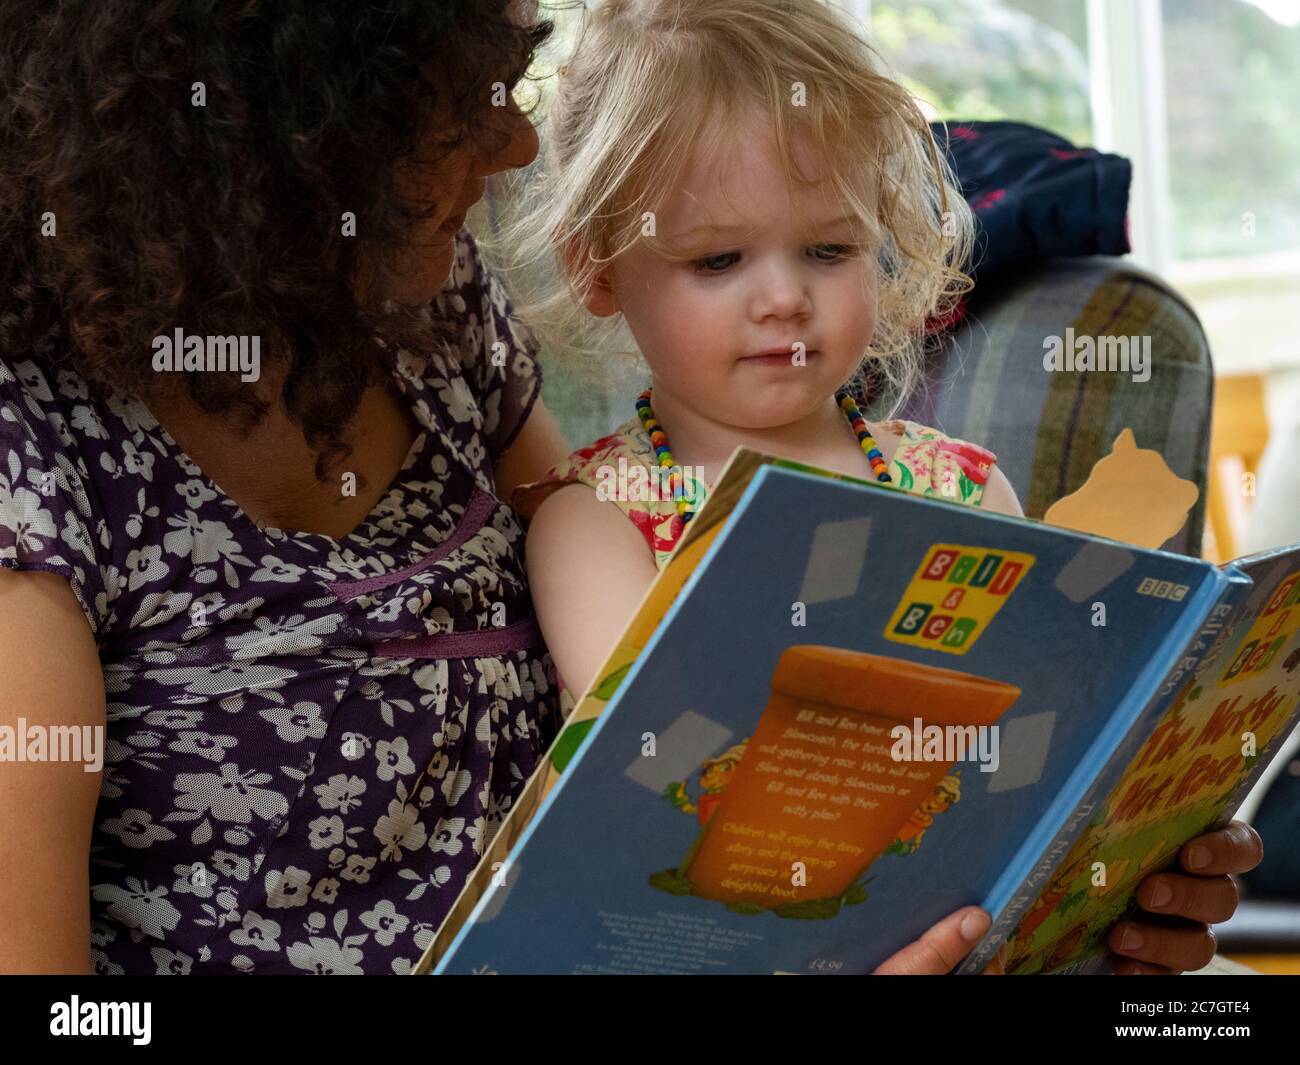 Toddler and granny reading a book together, UK Stock Photo